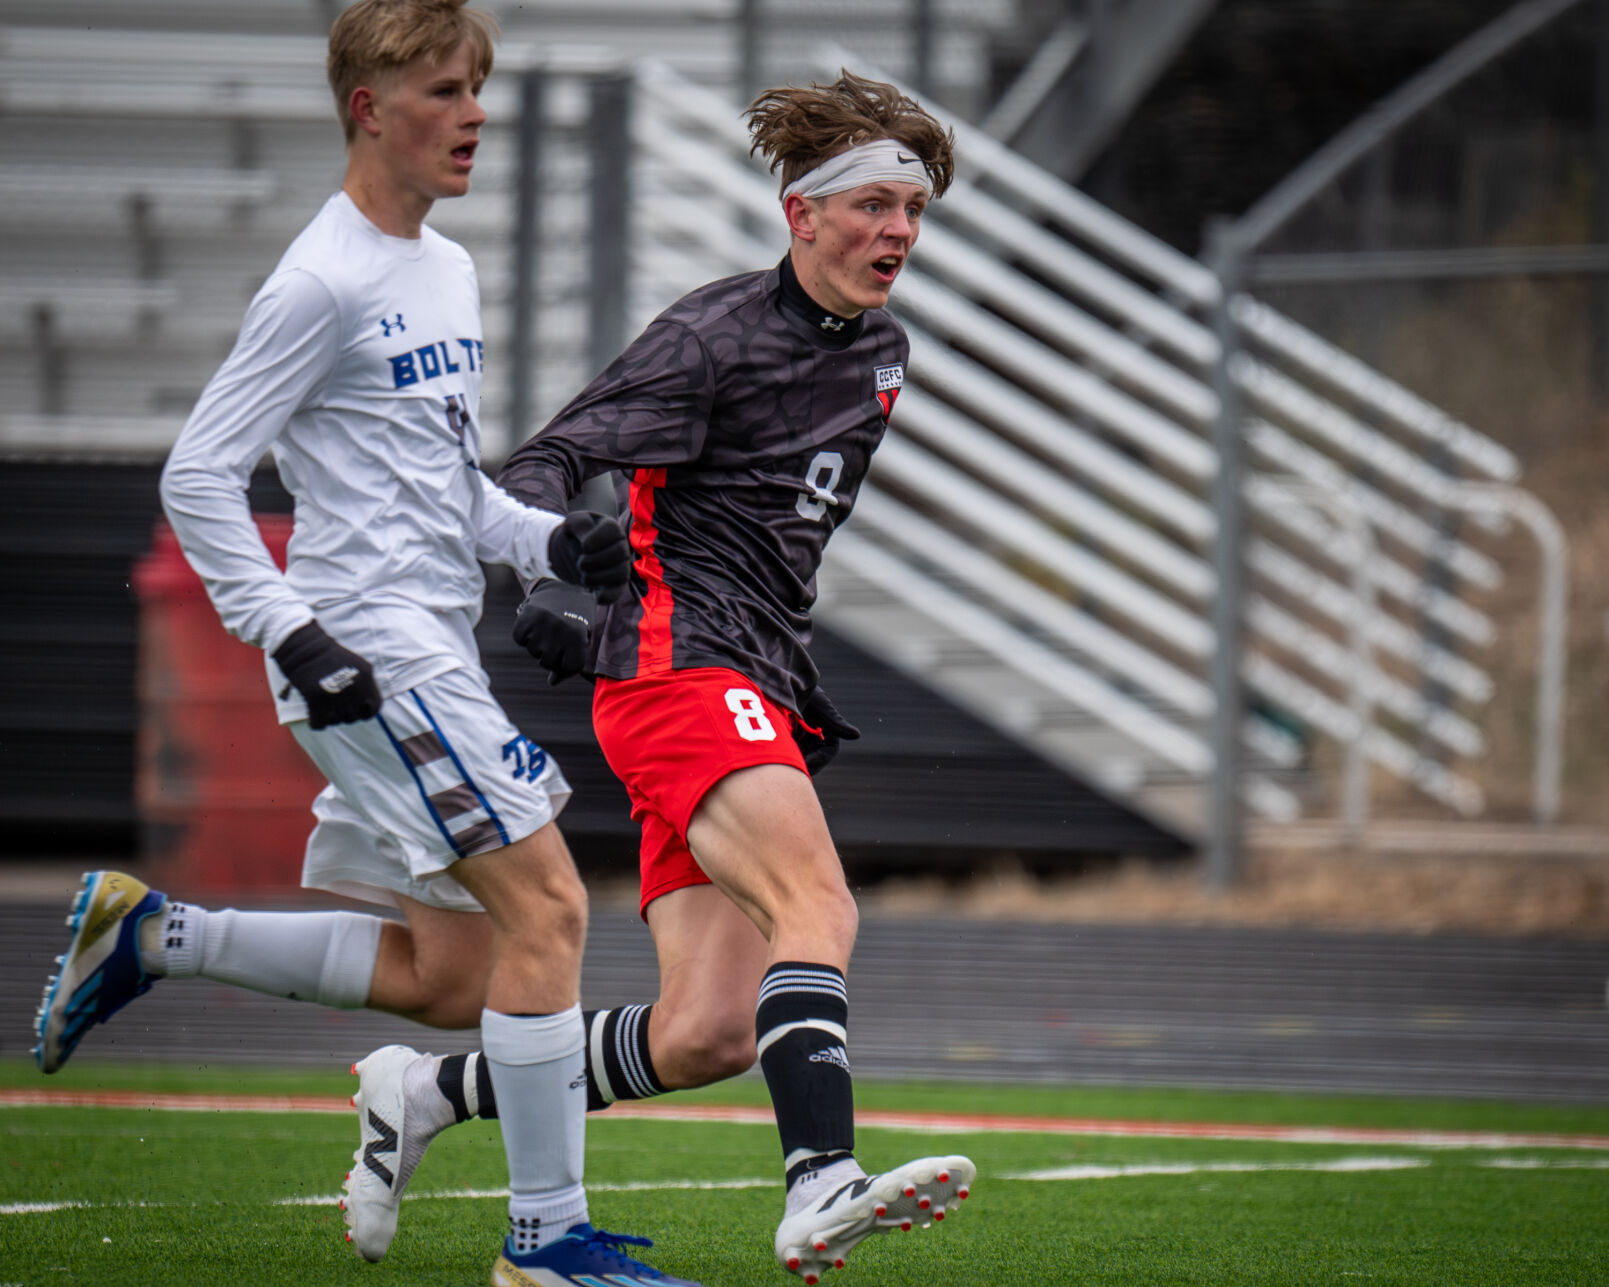 Cheyenne Central Defeats Thunder Basin 4-1: Undefeated Streak Continues with Hendren and Shumway Key Goals